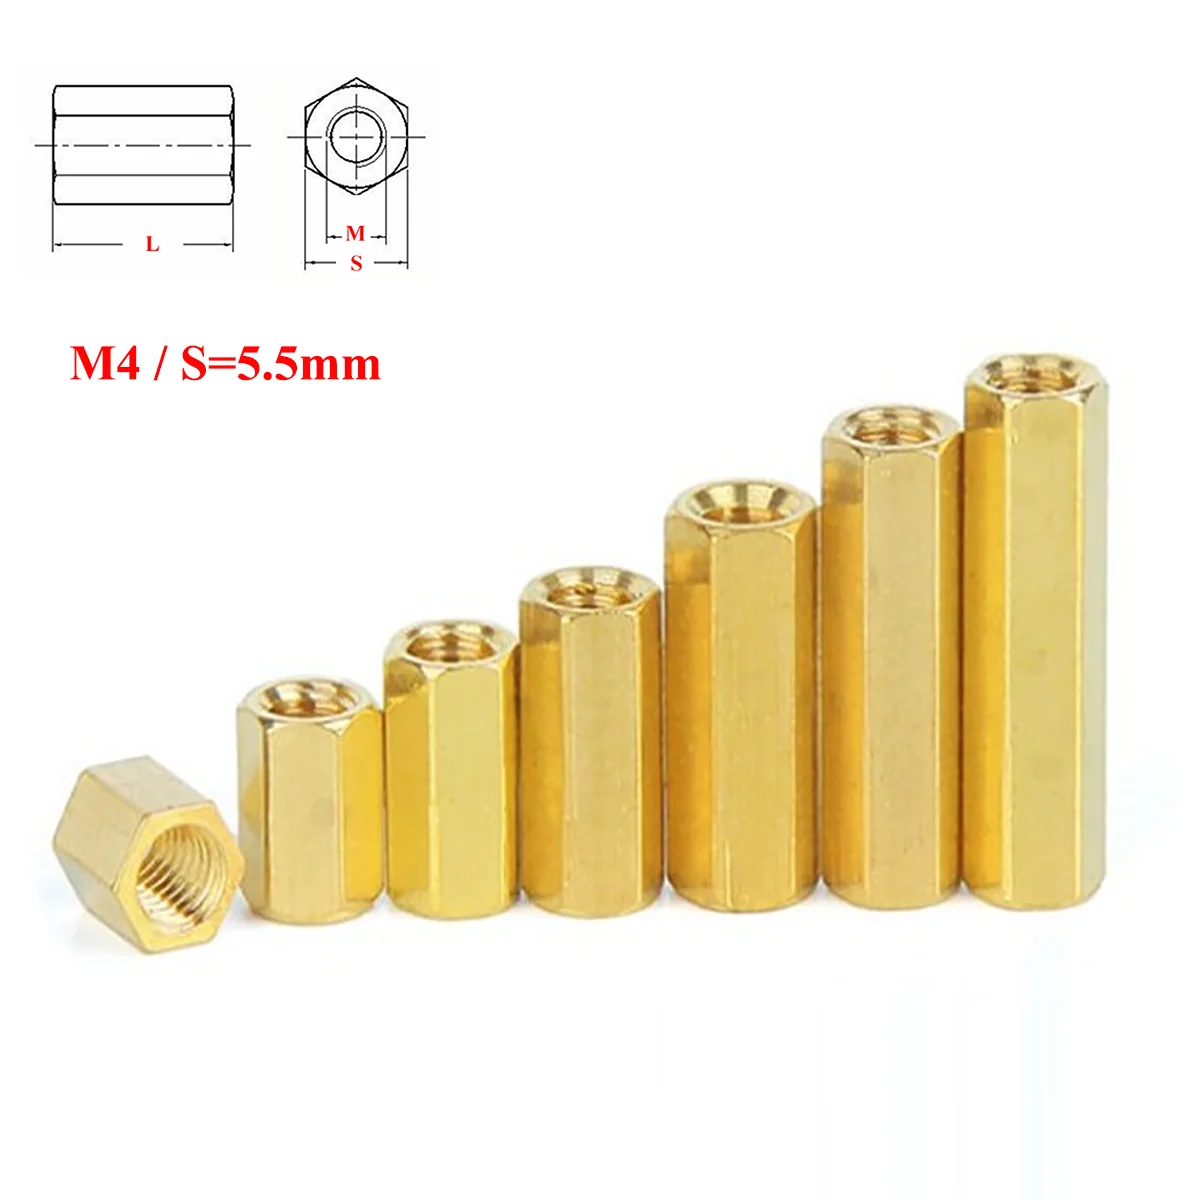 

5/10pcs M4 / S=5.5mm Brass Hex Standoff Pillars Hexagon Female Threaded Studs Sleeving PCB Motherboard Spacer Nuts Hollow Column